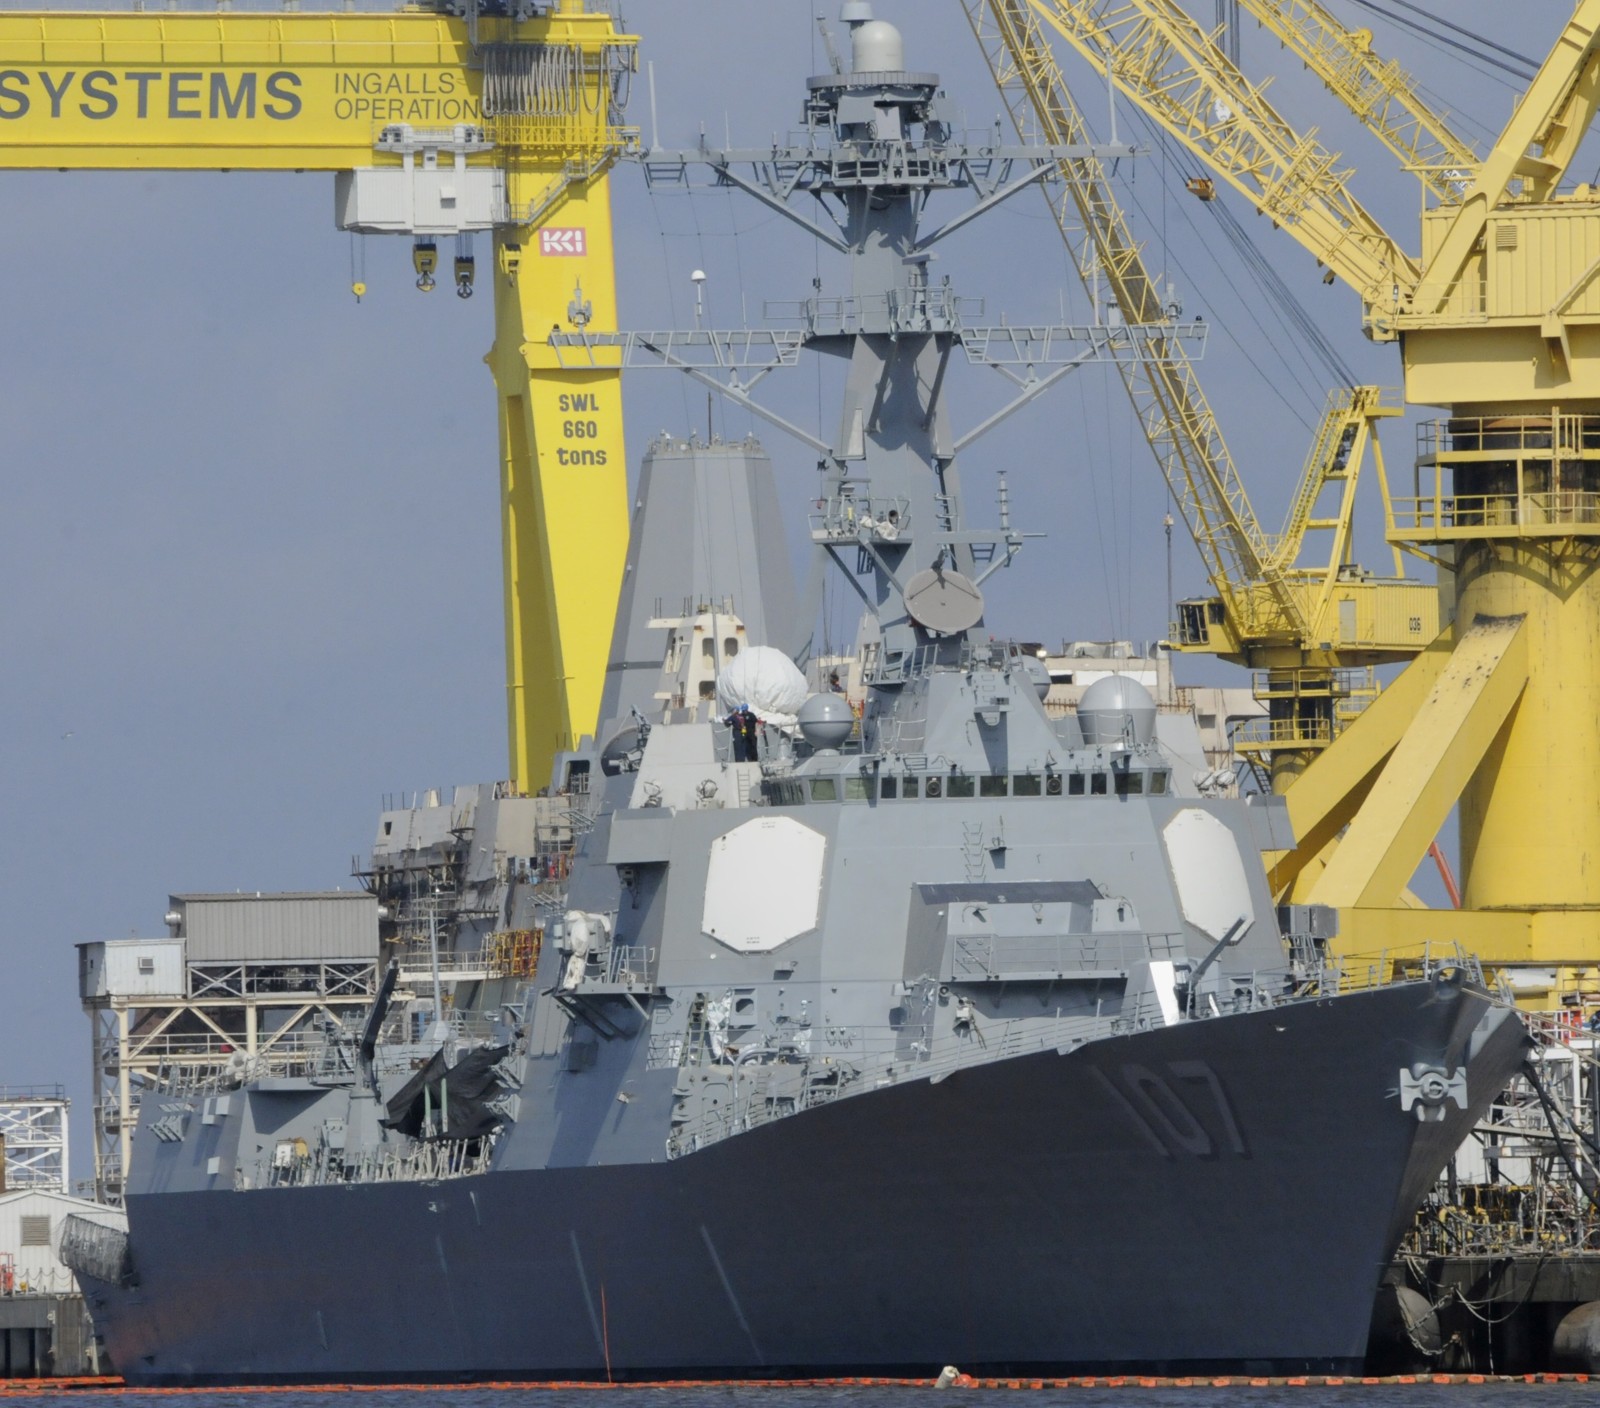 ddg-107 uss gravely arleigh burke class guided missile destroyer aegis us navy ingalls pascagoula 02